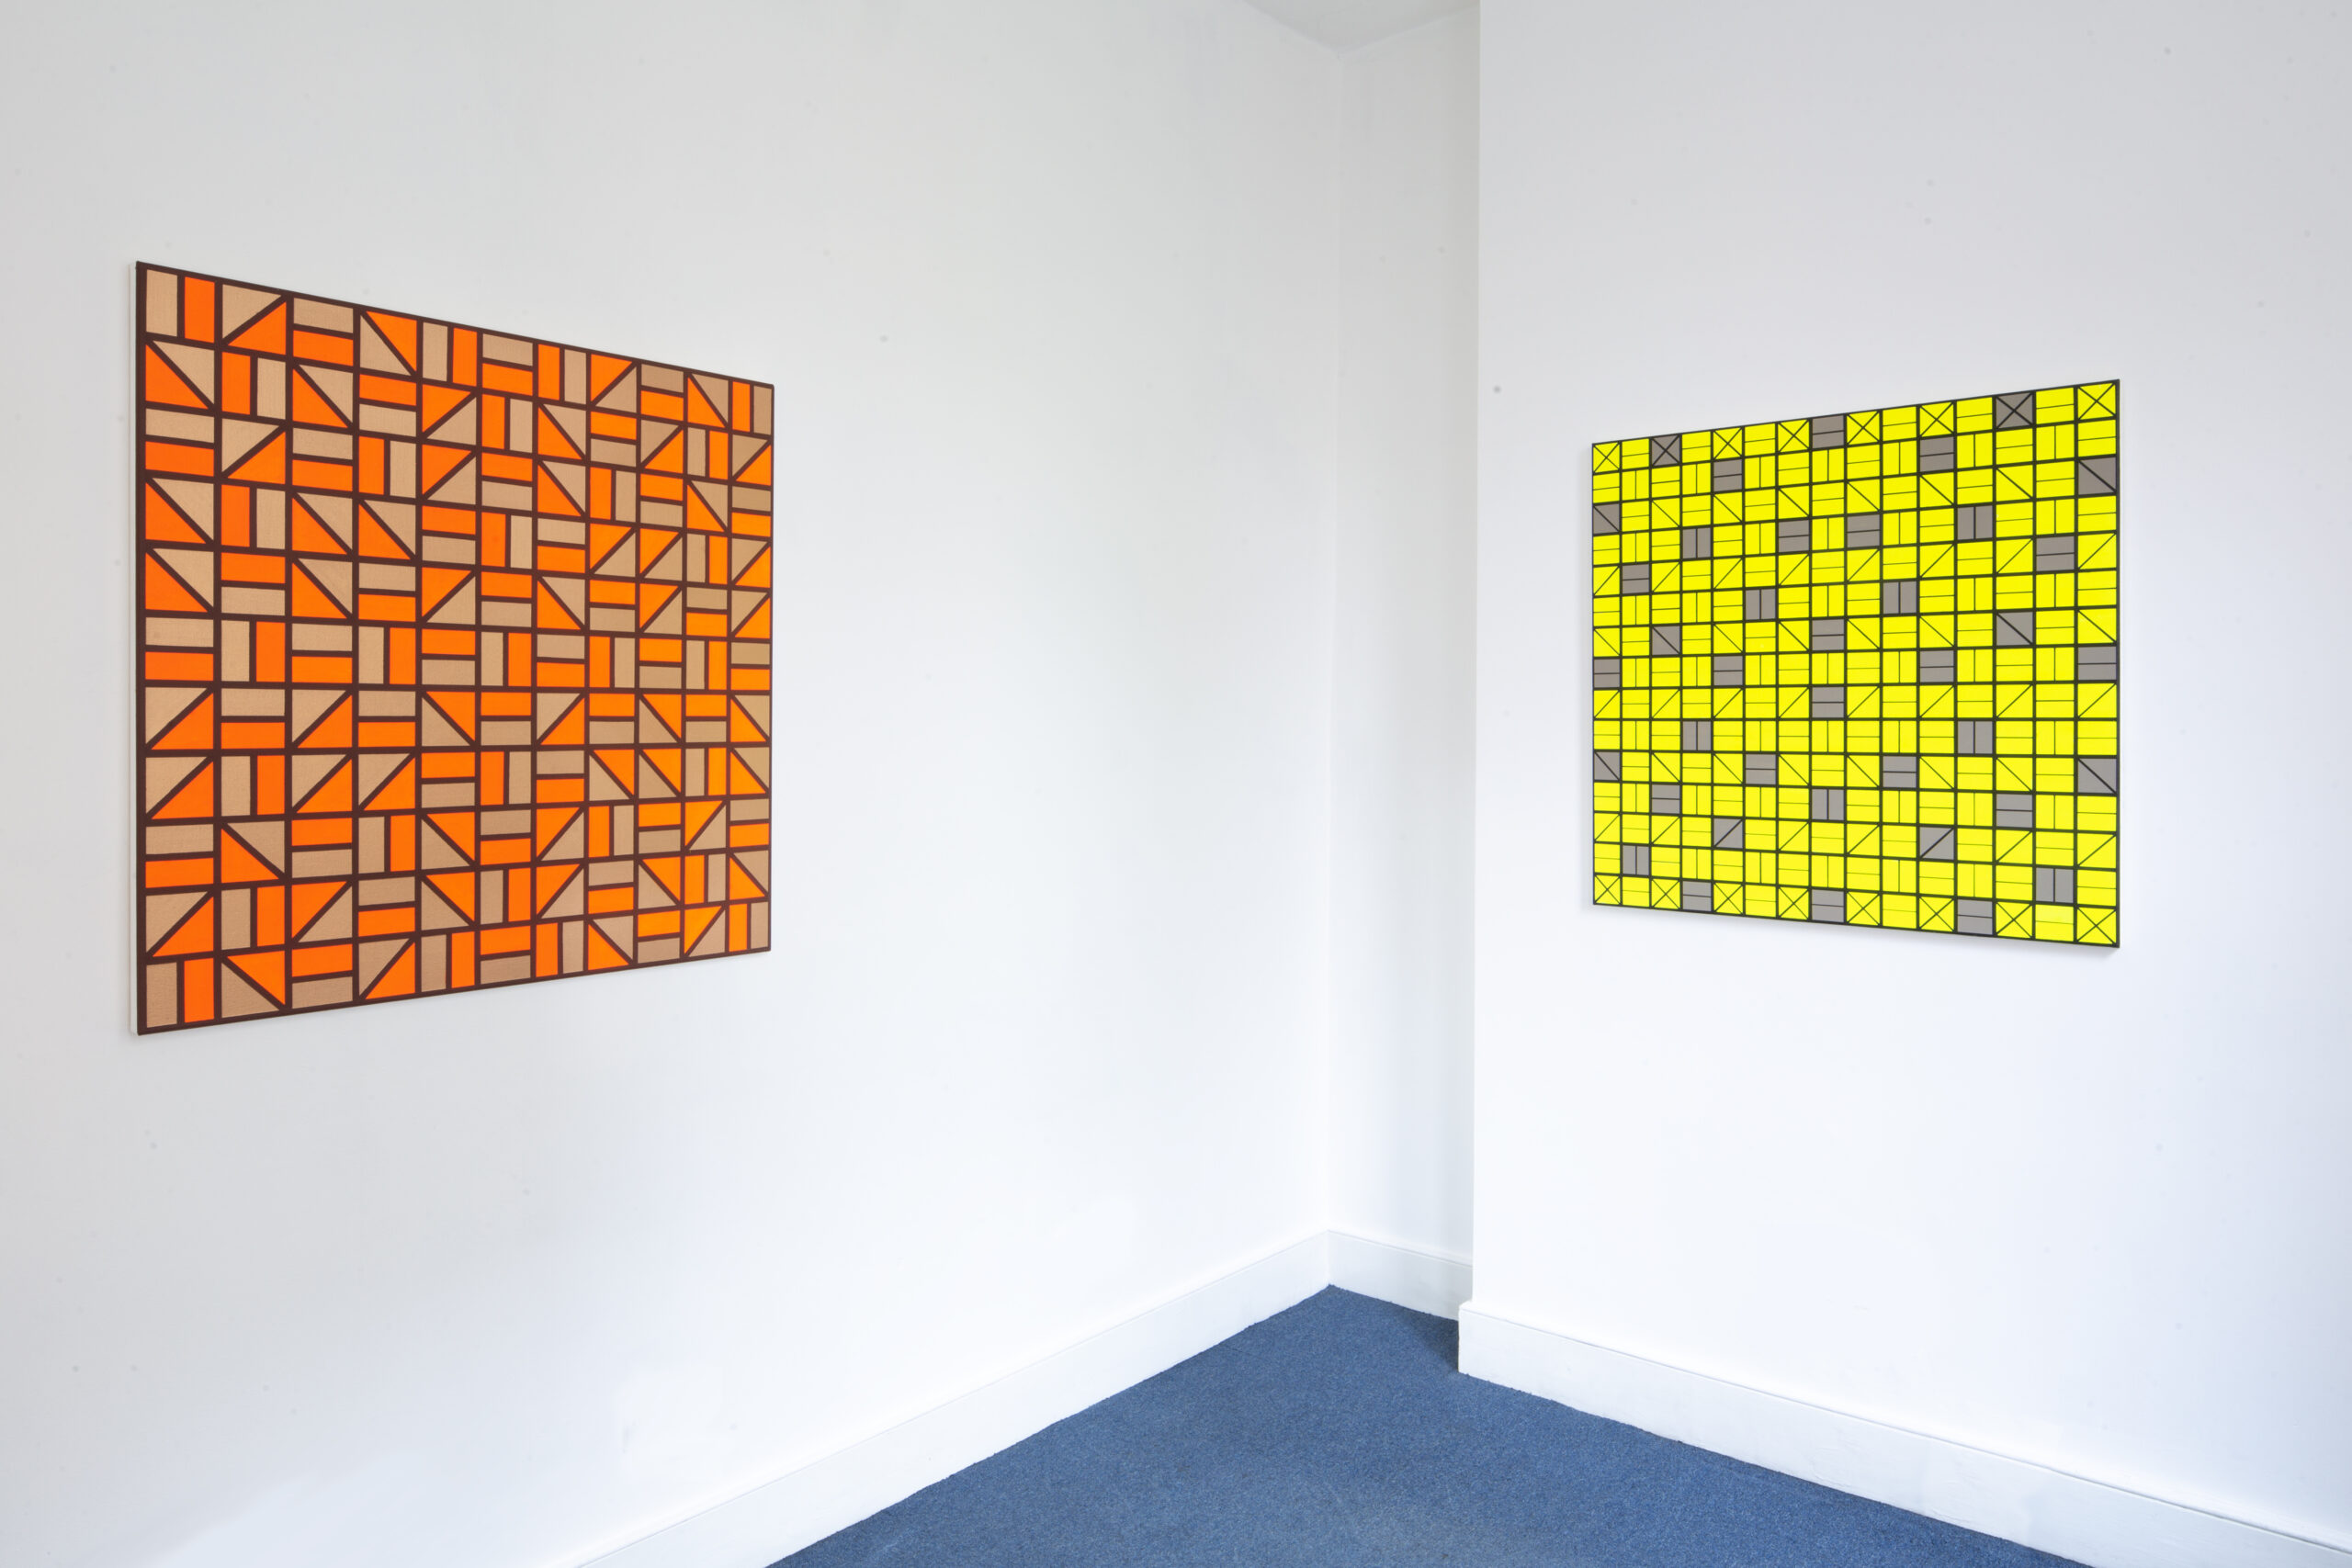 Richard Kirwan 'Intellectual Property' at Lungley Gallery, exhibition view, 2022.